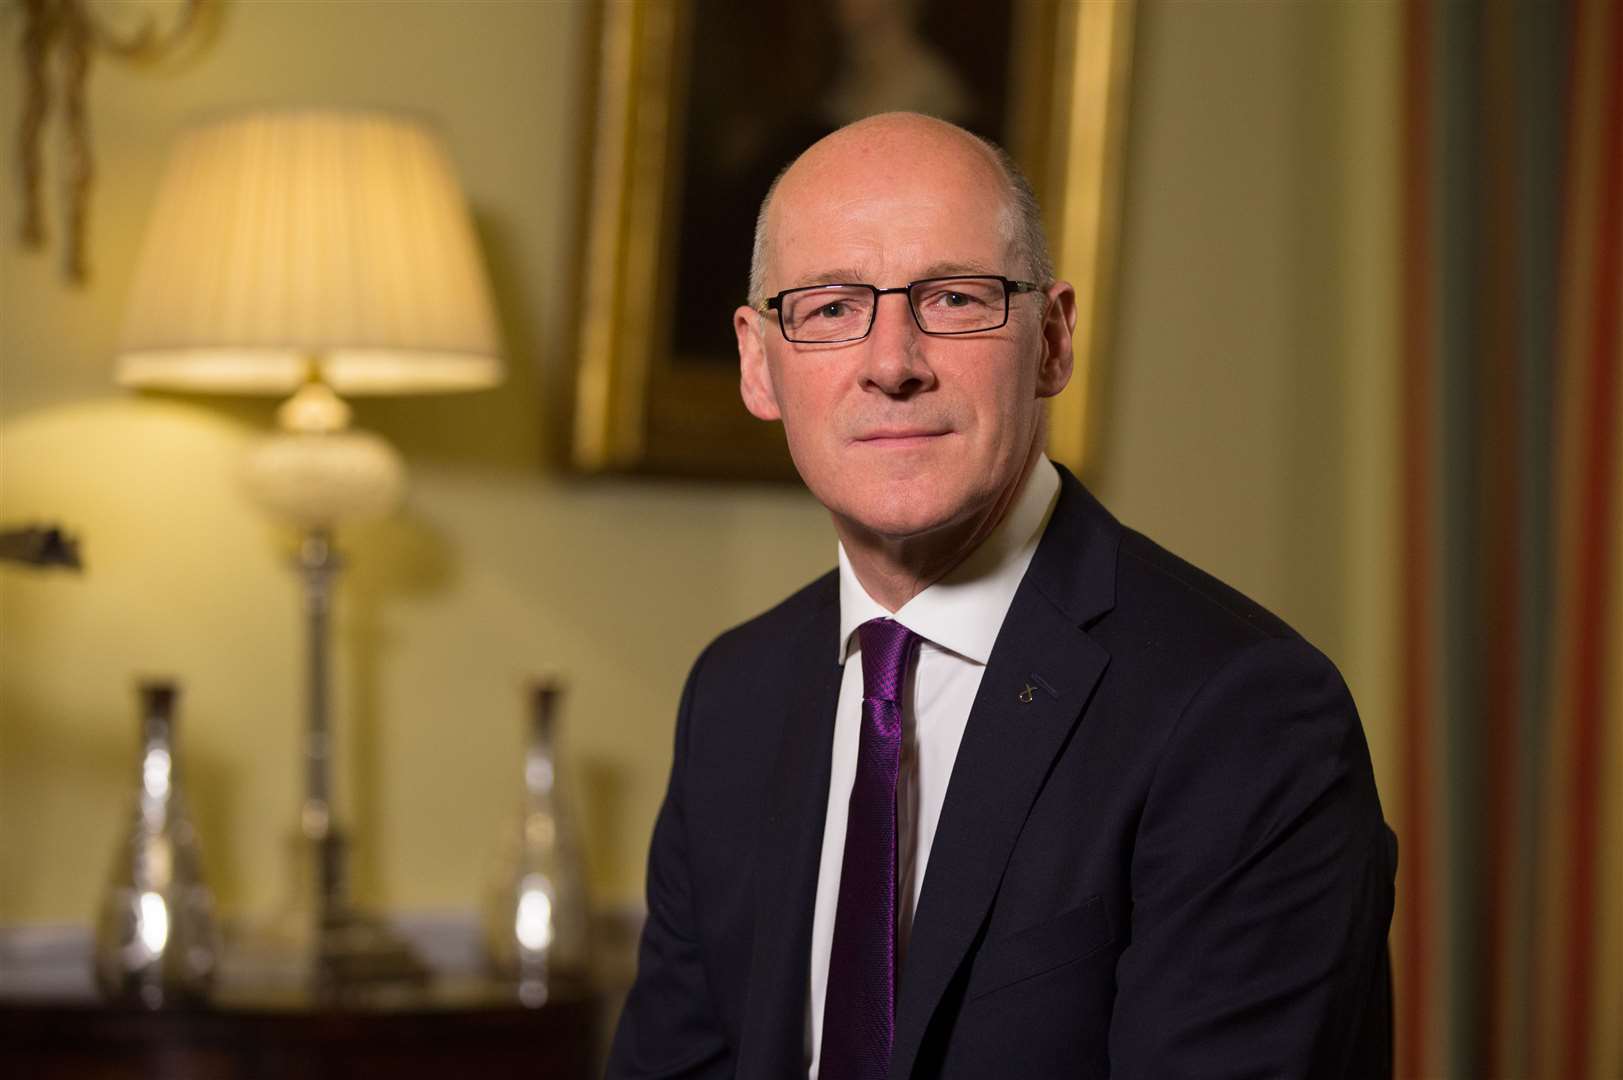 Education secretary John Swinney says the priority is ensuring the highest-quality education in a safe environment.